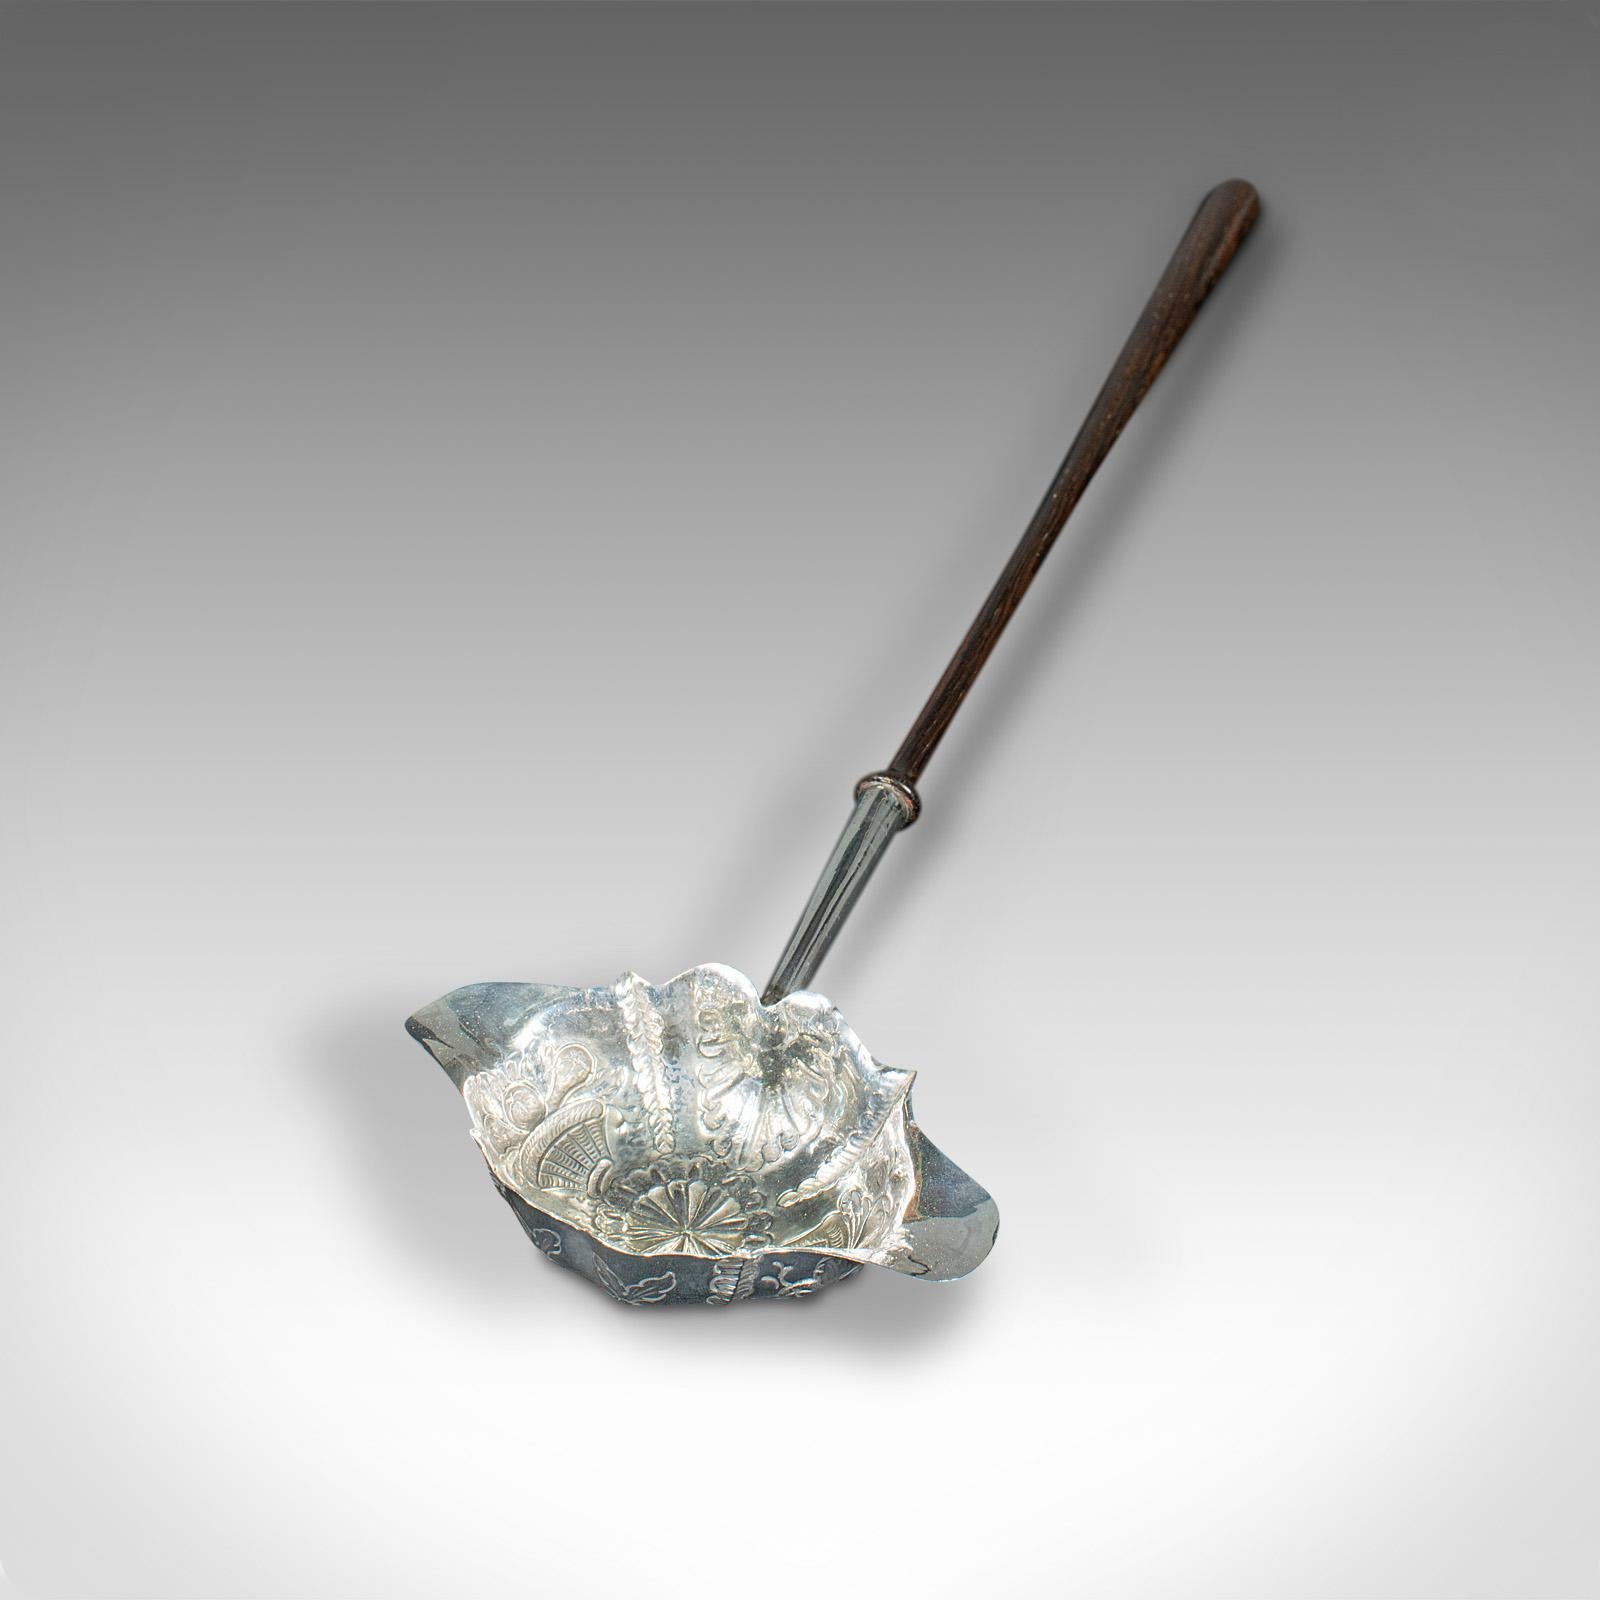 This is an antique double lip toddy spoon. An English, silver serving ladle, dating to the Georgian period, hallmark for 1772.

Fascinating example of Georgian decorative tableware
Displays a desirable aged patina and in very good